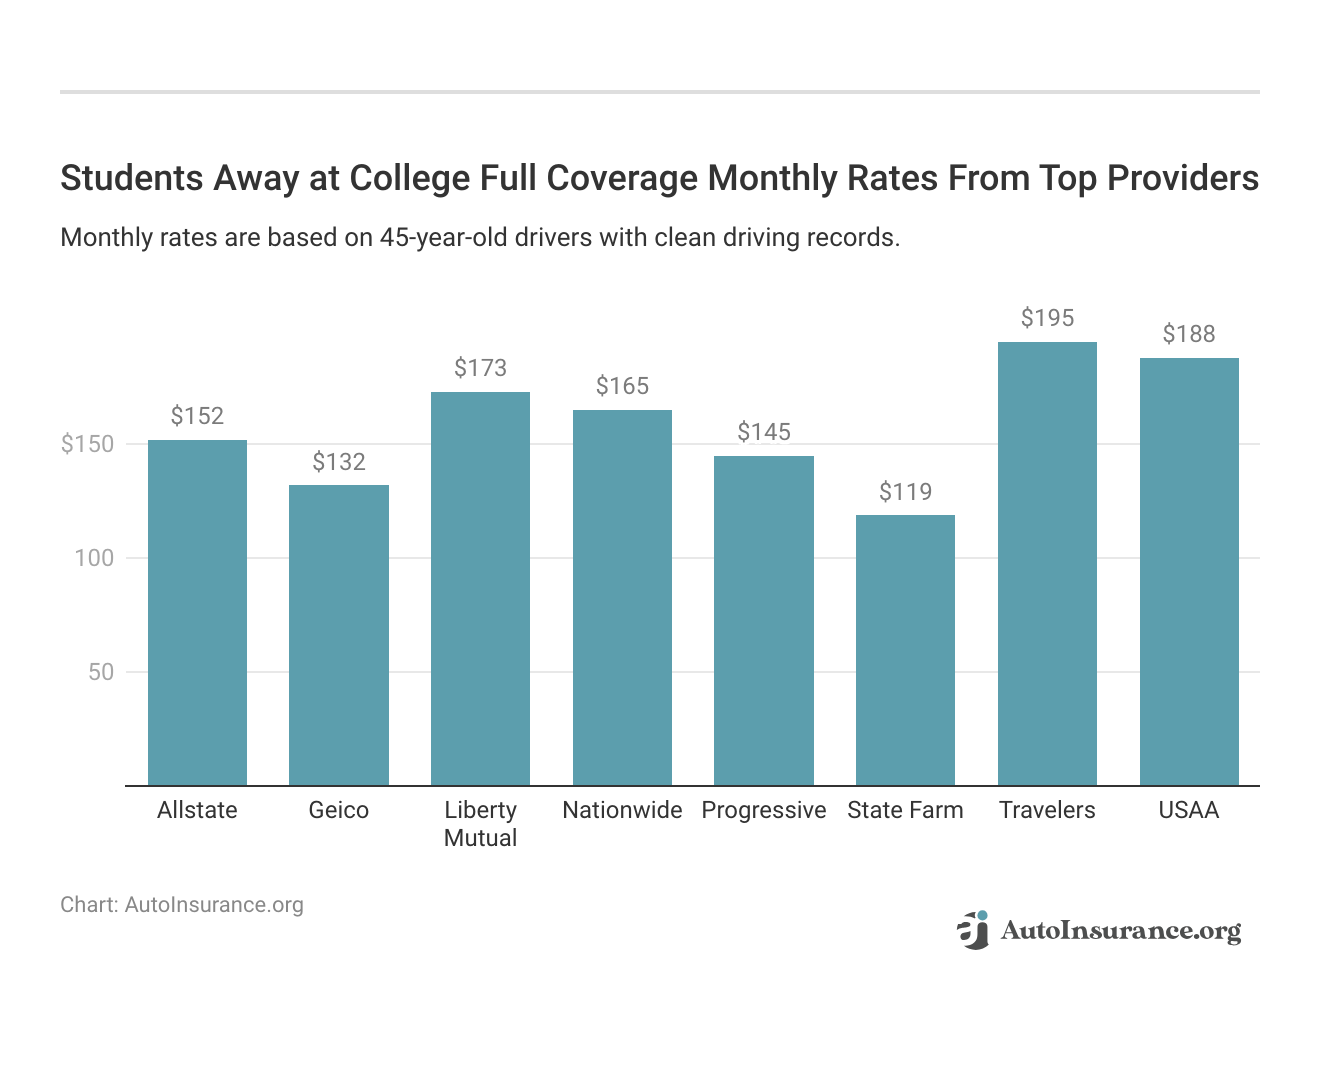 <h3>Students Away at College Full Coverage Monthly Rates From Top Providers</h3>